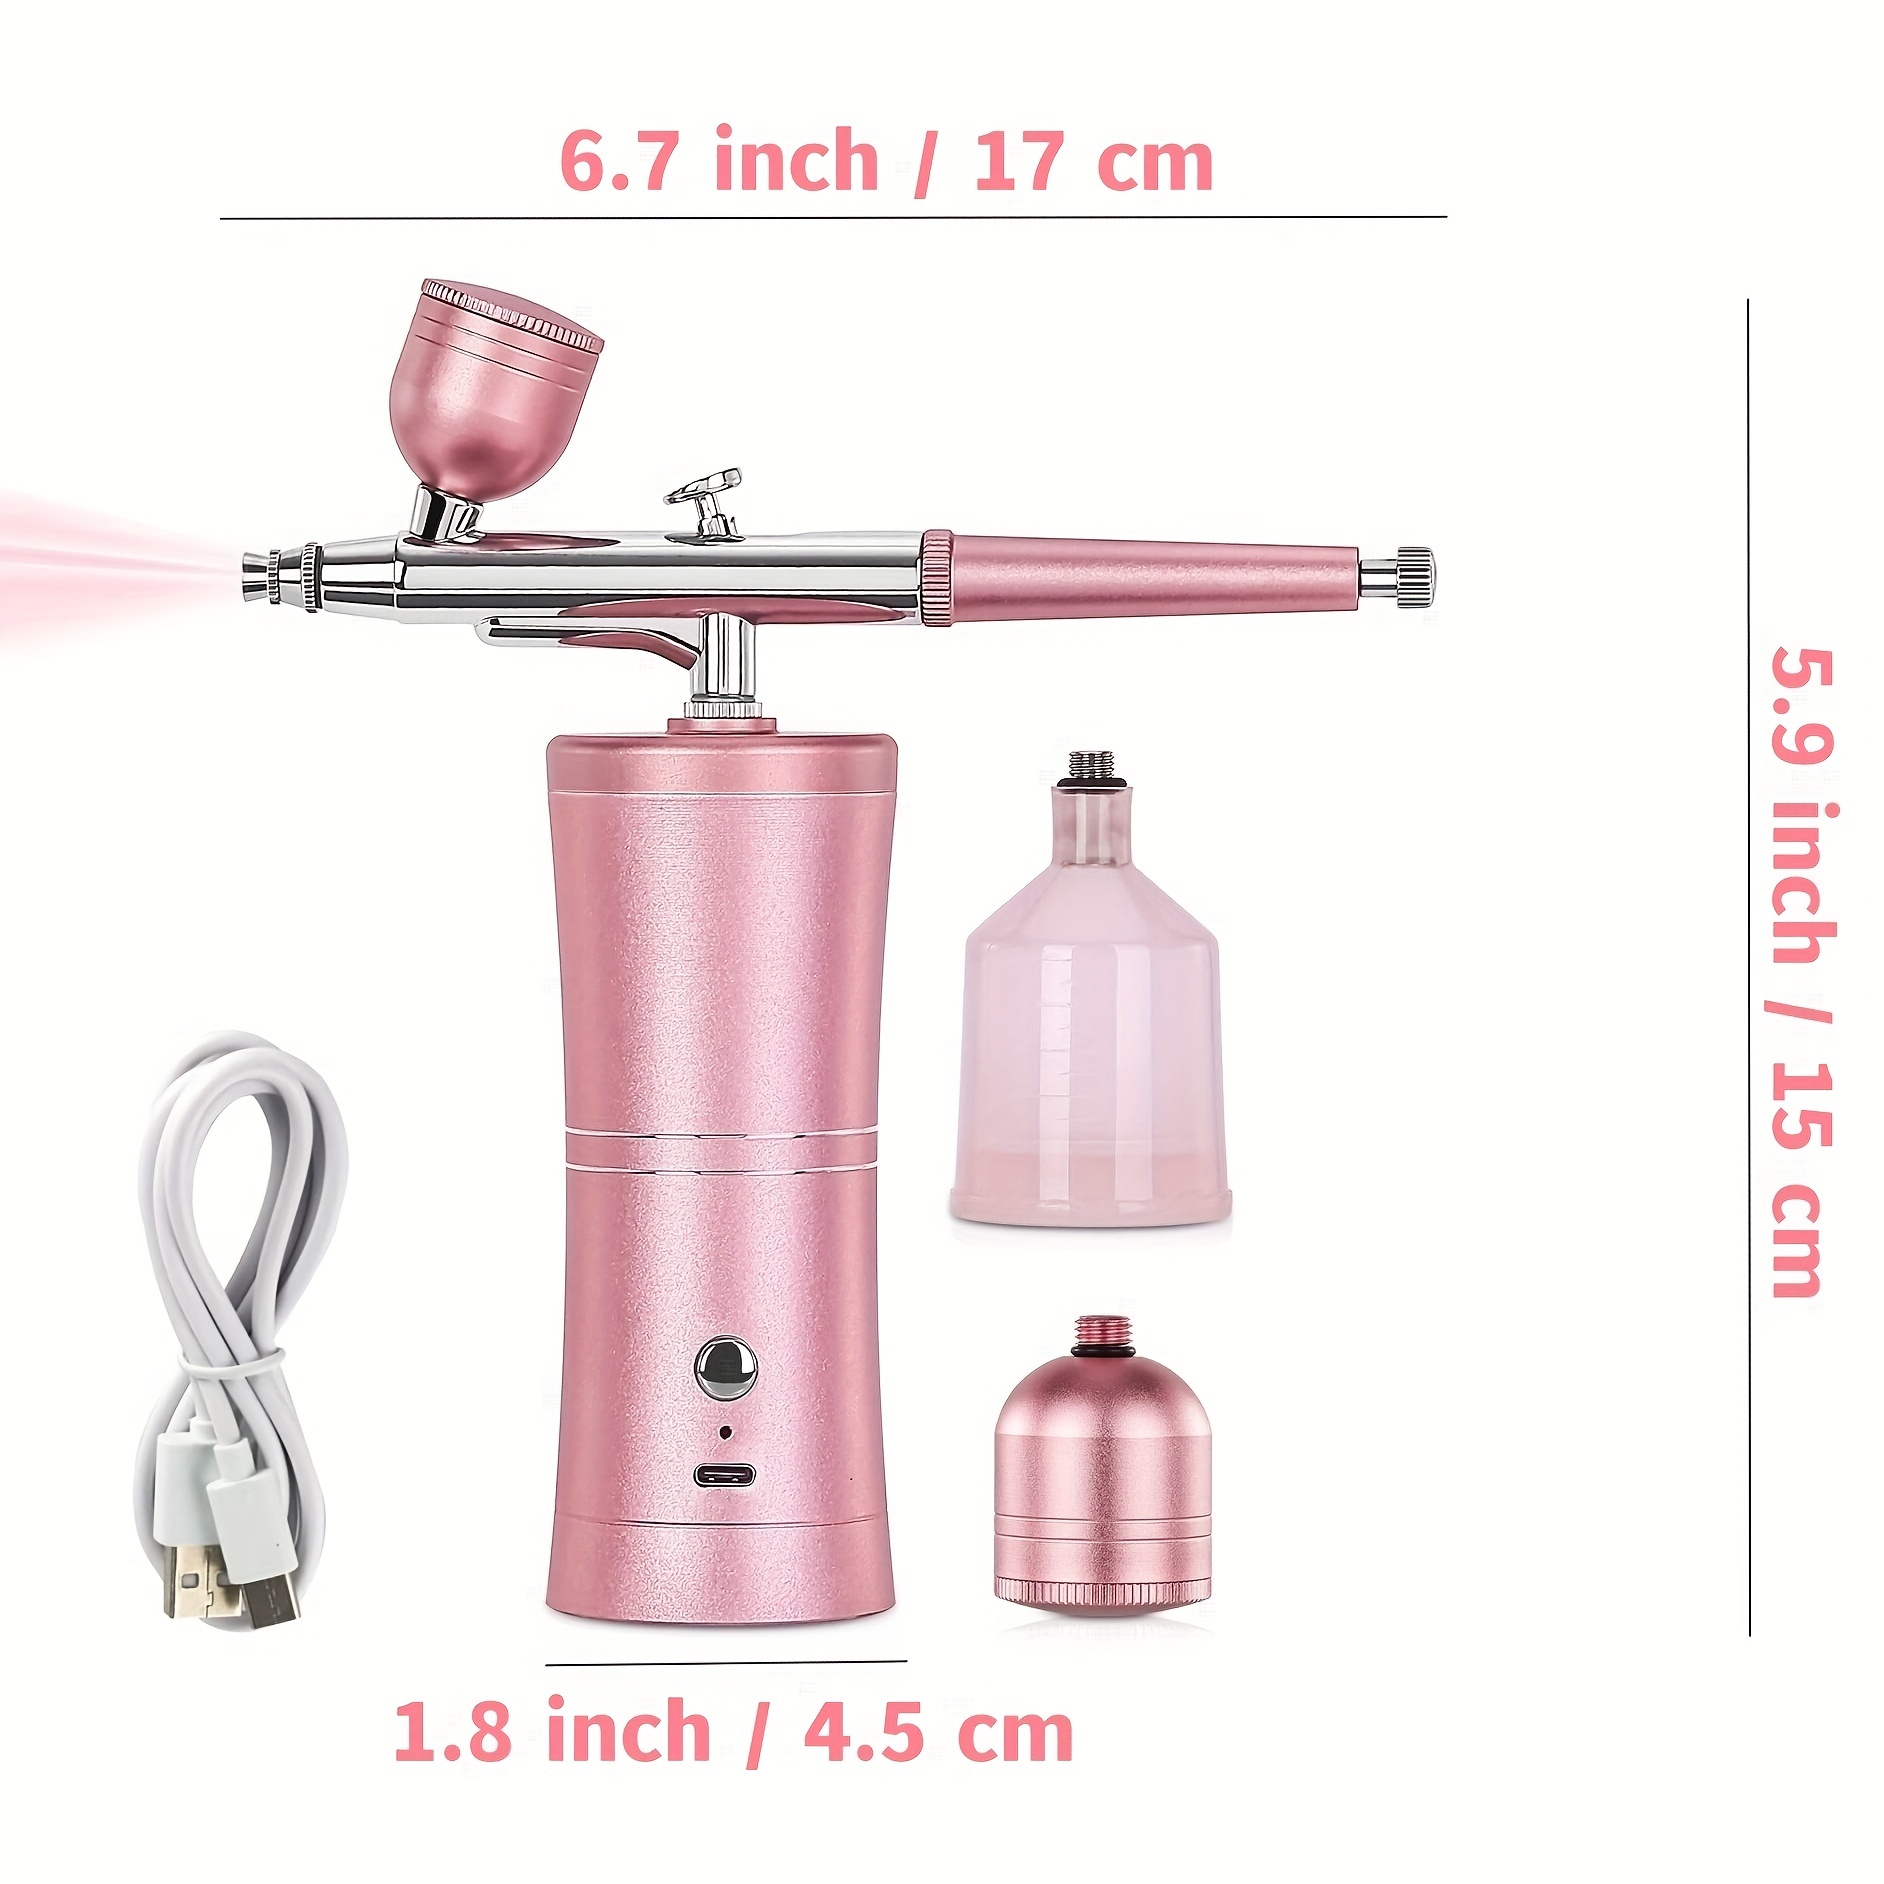  Airbrush Kit for Paint Nails - Cordless Airbrush Kit with  Compressor Portable Nail Airbrush Machine 0.3mm Nozzle Rechargeable Air  Brush Kit for Model Painting Makeup Barber Tattoo Food Cake Decor 